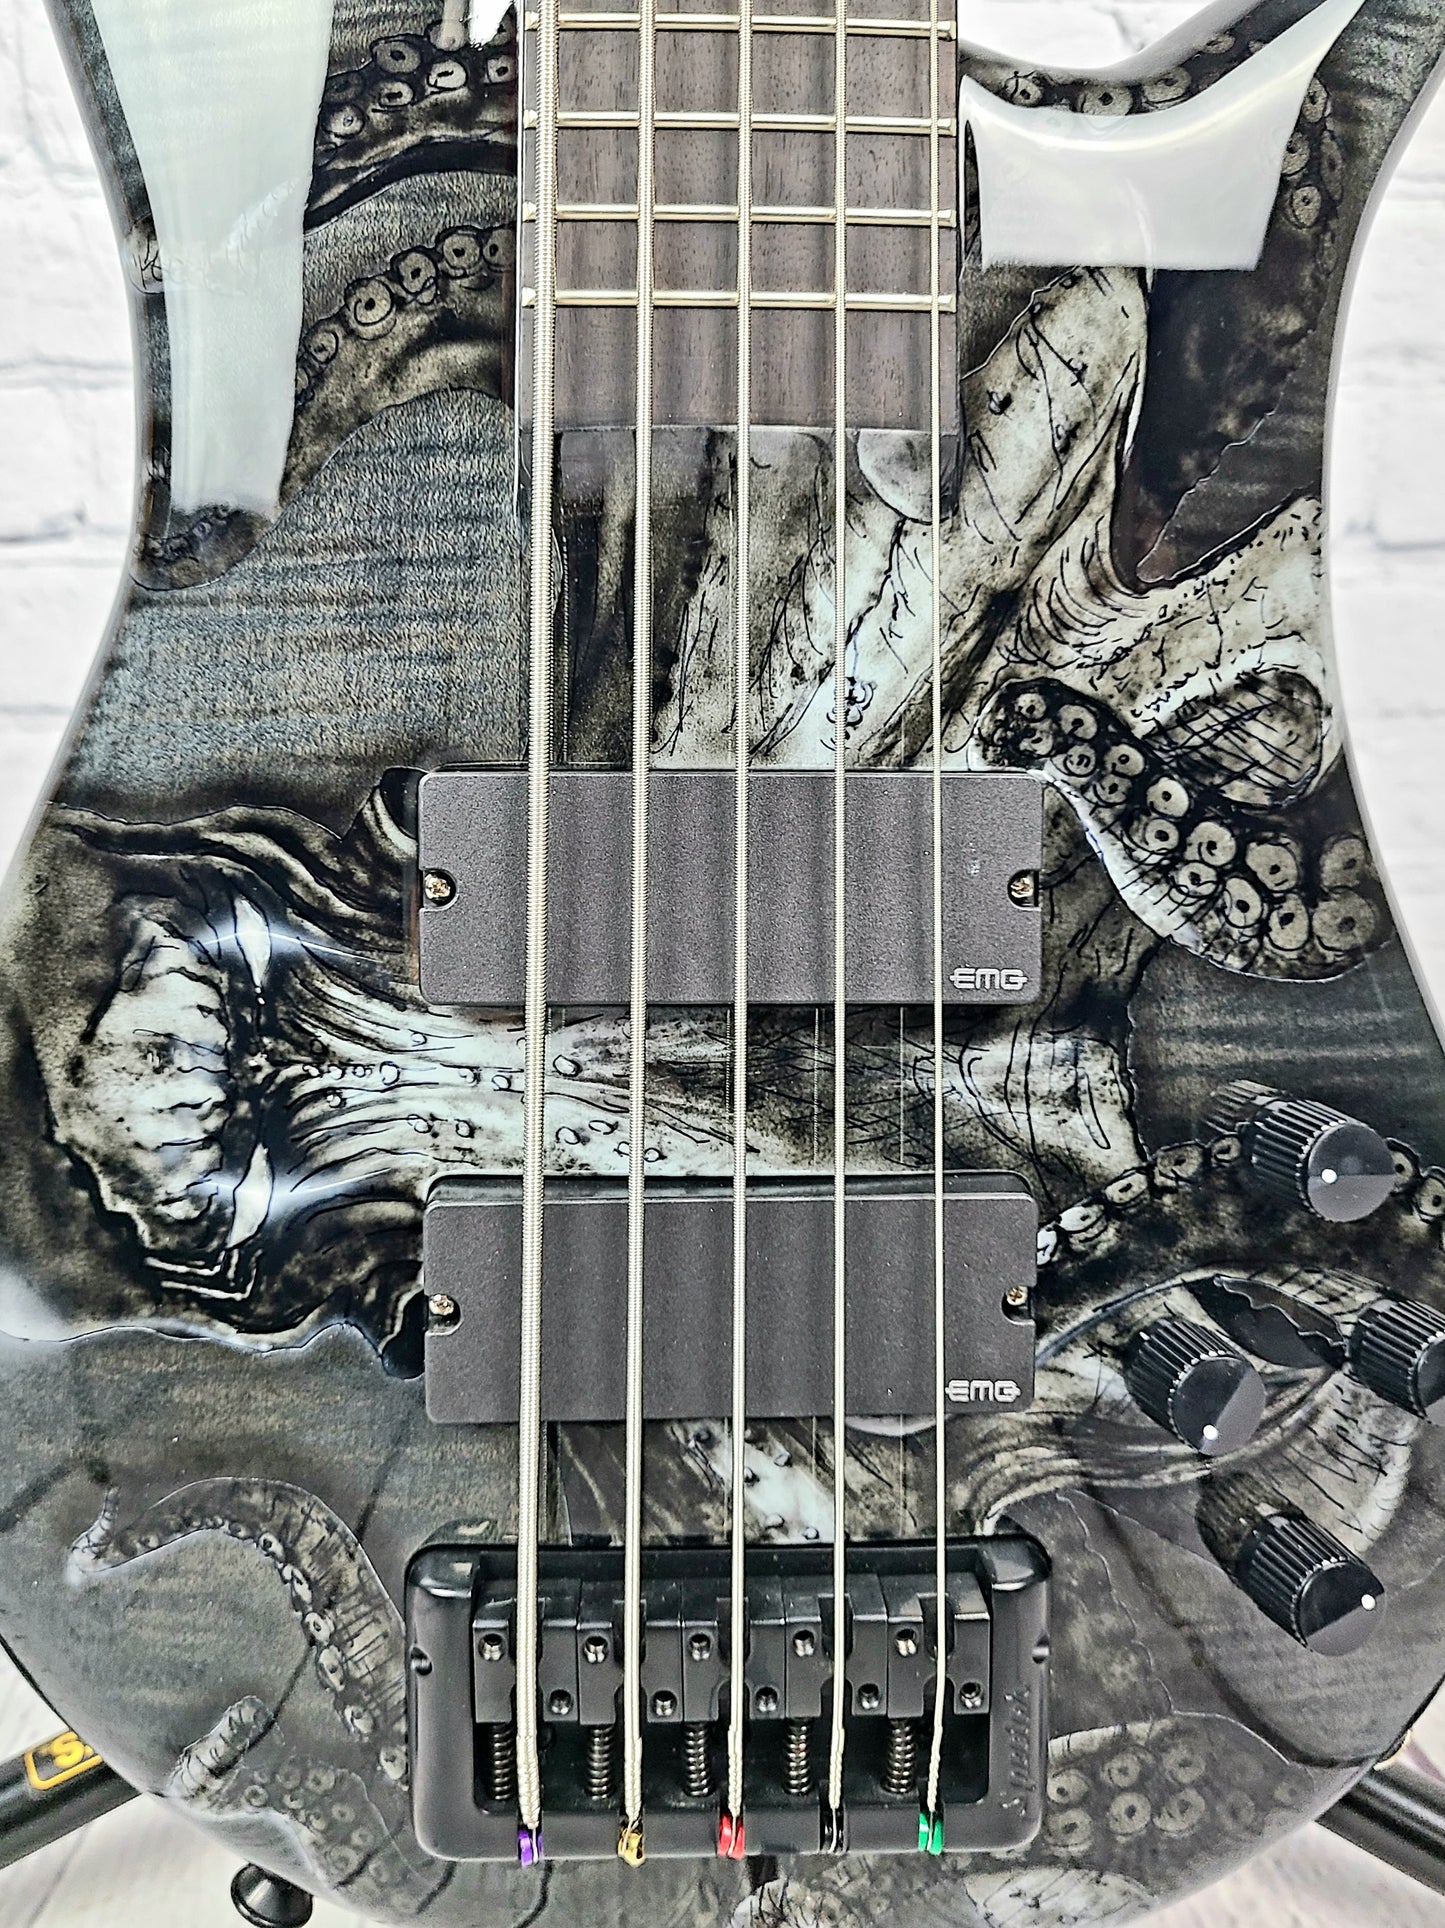 Spector Euro 5 LE 5 String Bass Guitar Squid Limited Edition Darkglass EMG